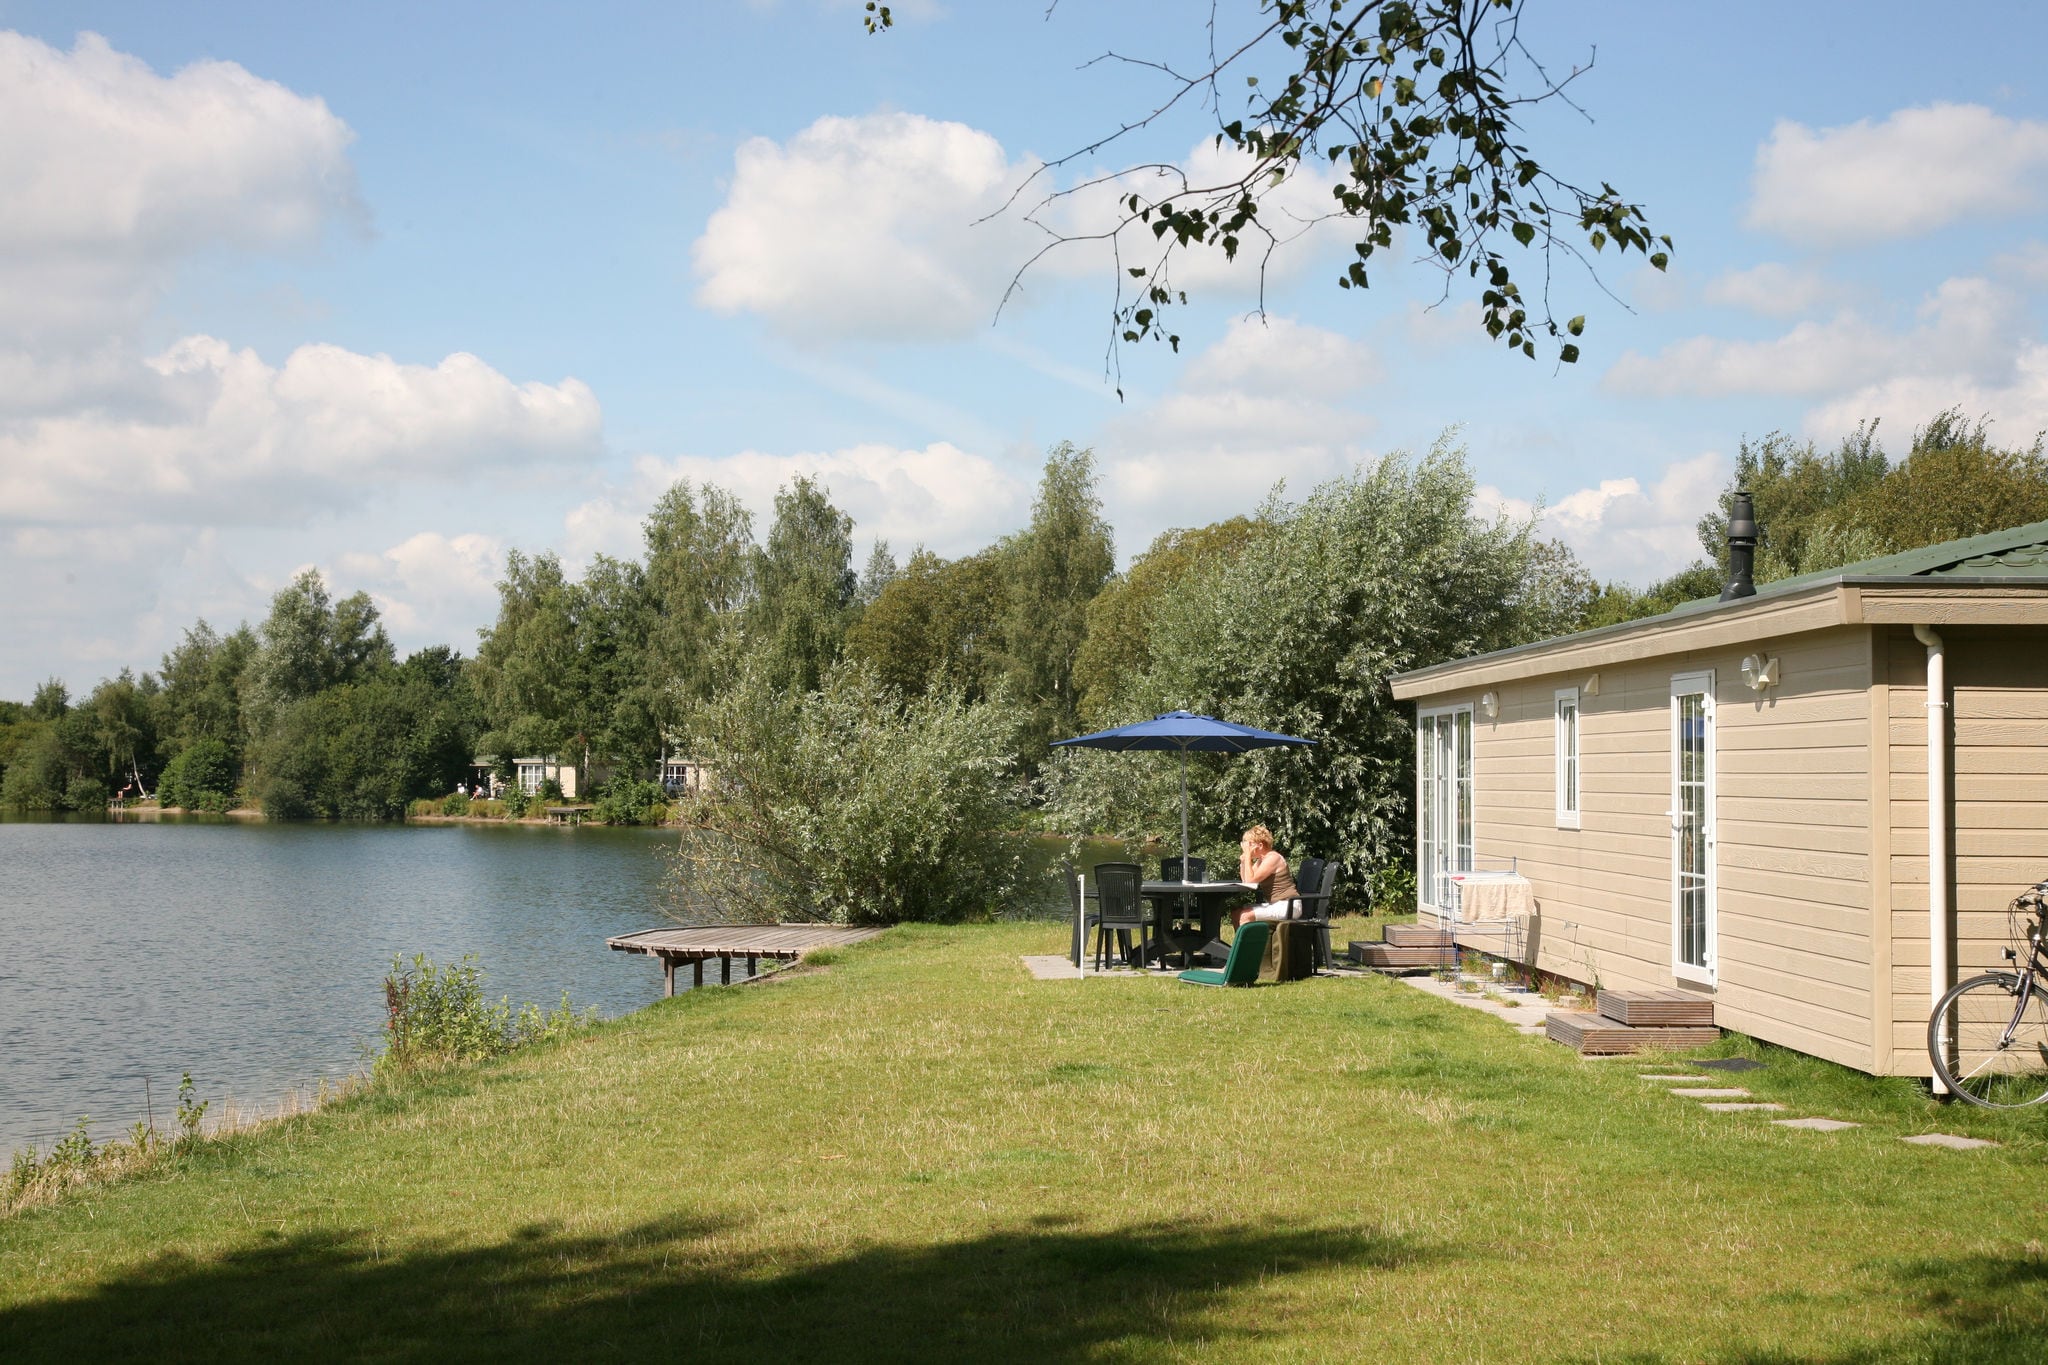 Detached holiday home with a combination microwave, in a holiday park in Twente